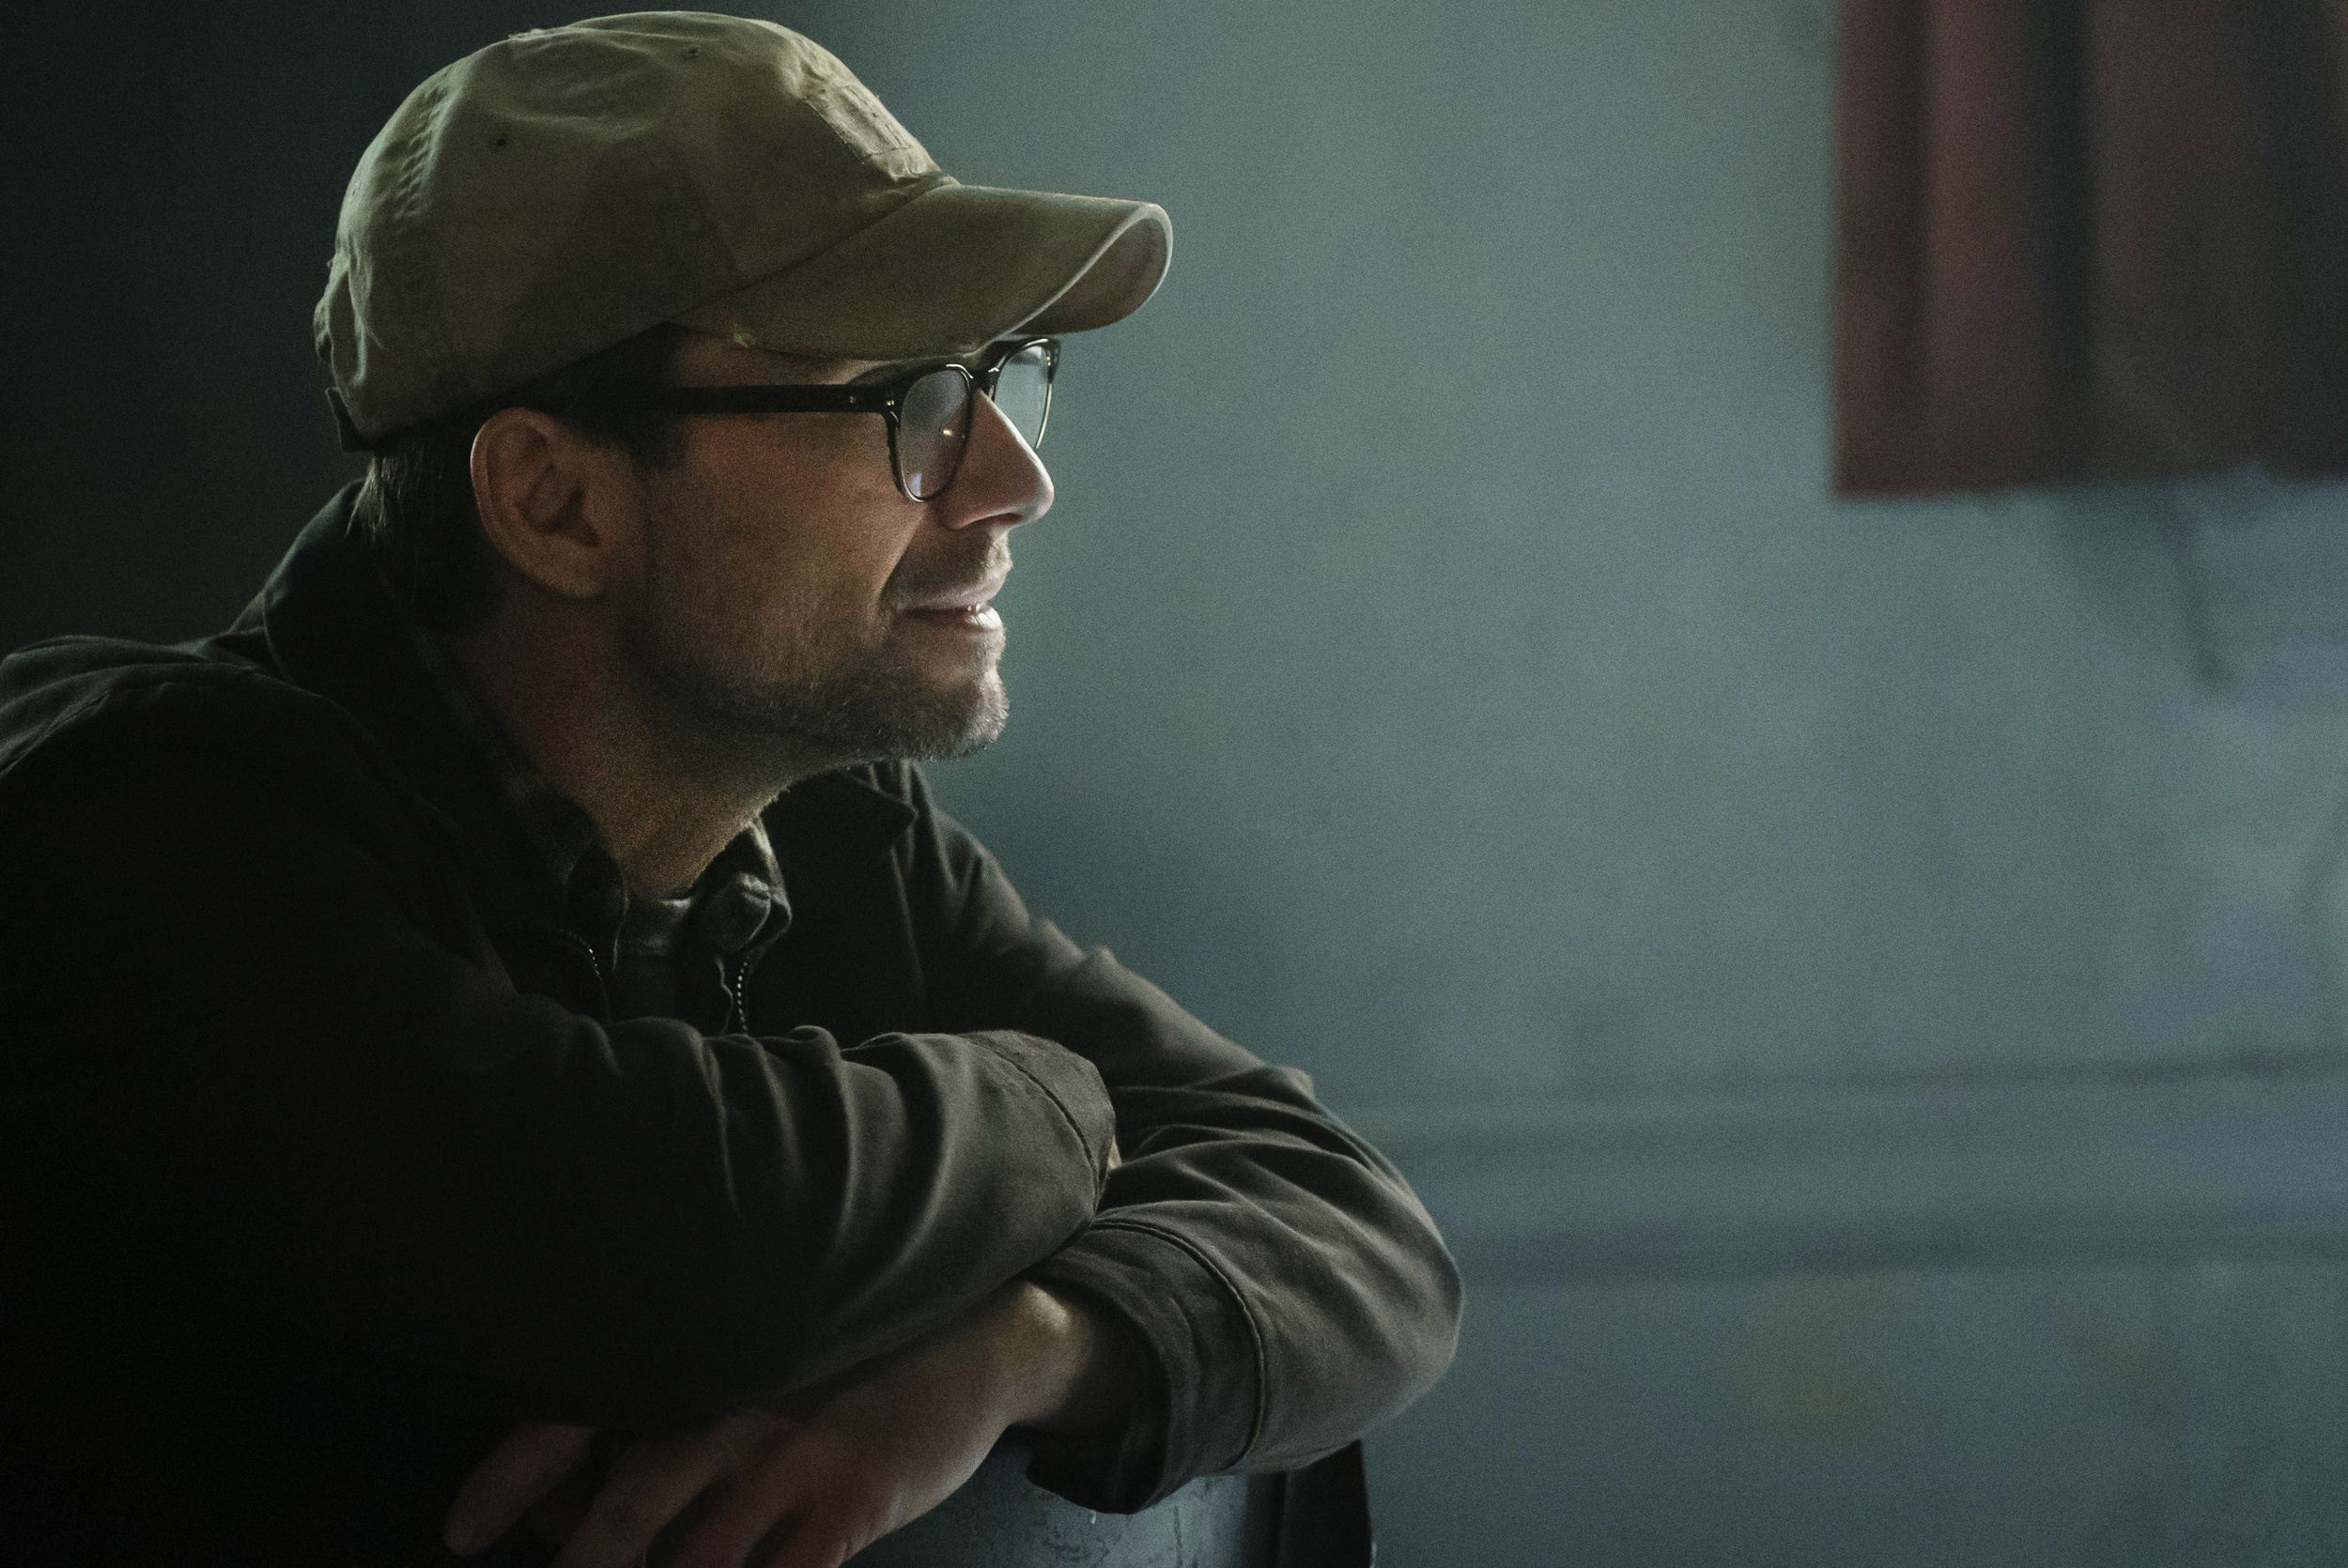 <p>Speaking of Esmail, he’s got a thing for movie stars making a move to TV. Slater had transitioned to being a TV guy before his turn on <em>Mr. Robot</em>, though. You would be forgiven for forgetting <em>The Forgotten</em>, which ran 17 episodes, or <em>Breaking In</em>, which ran 20.</p><p>You may also like: <a href='https://www.yardbarker.com/entertainment/articles/20_facts_you_might_not_know_about_return_of_the_jedi_010924/s1__37682010'>20 facts you might not know about 'Return of the Jedi'</a></p>